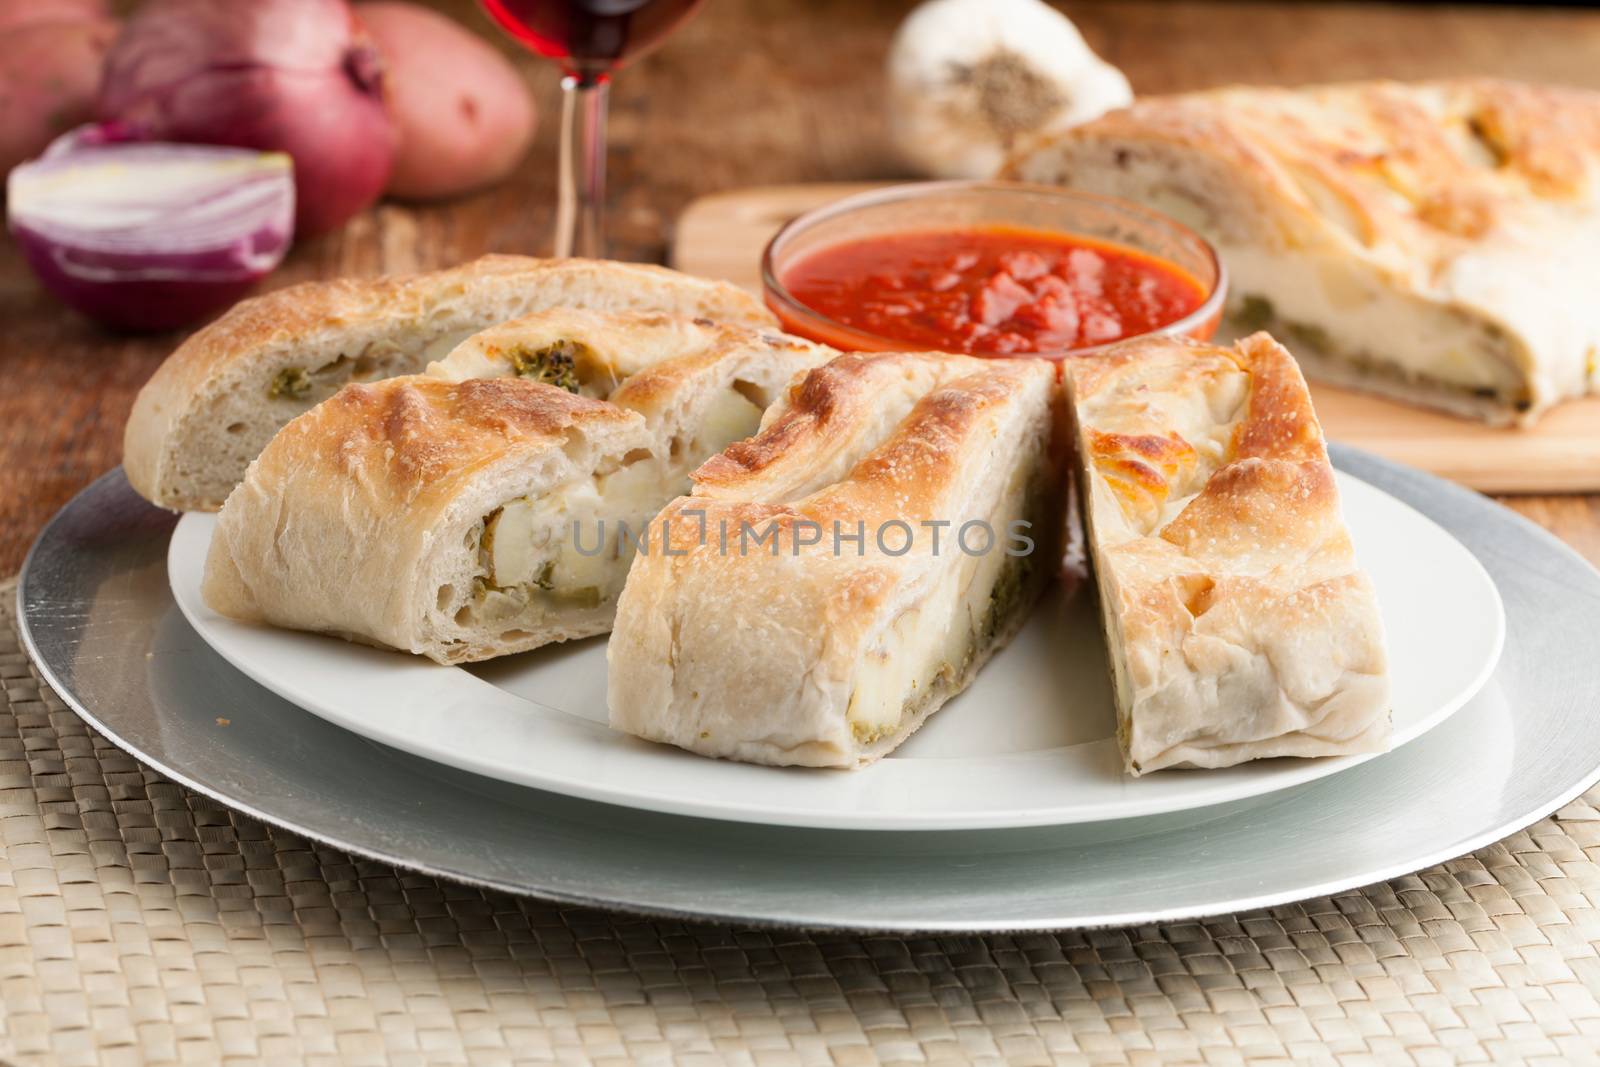 Homemade stromboli or stuffed bread with broccoli potatoes garlic onions and mozzarella cheese along with a side of marinara dipping sauce.